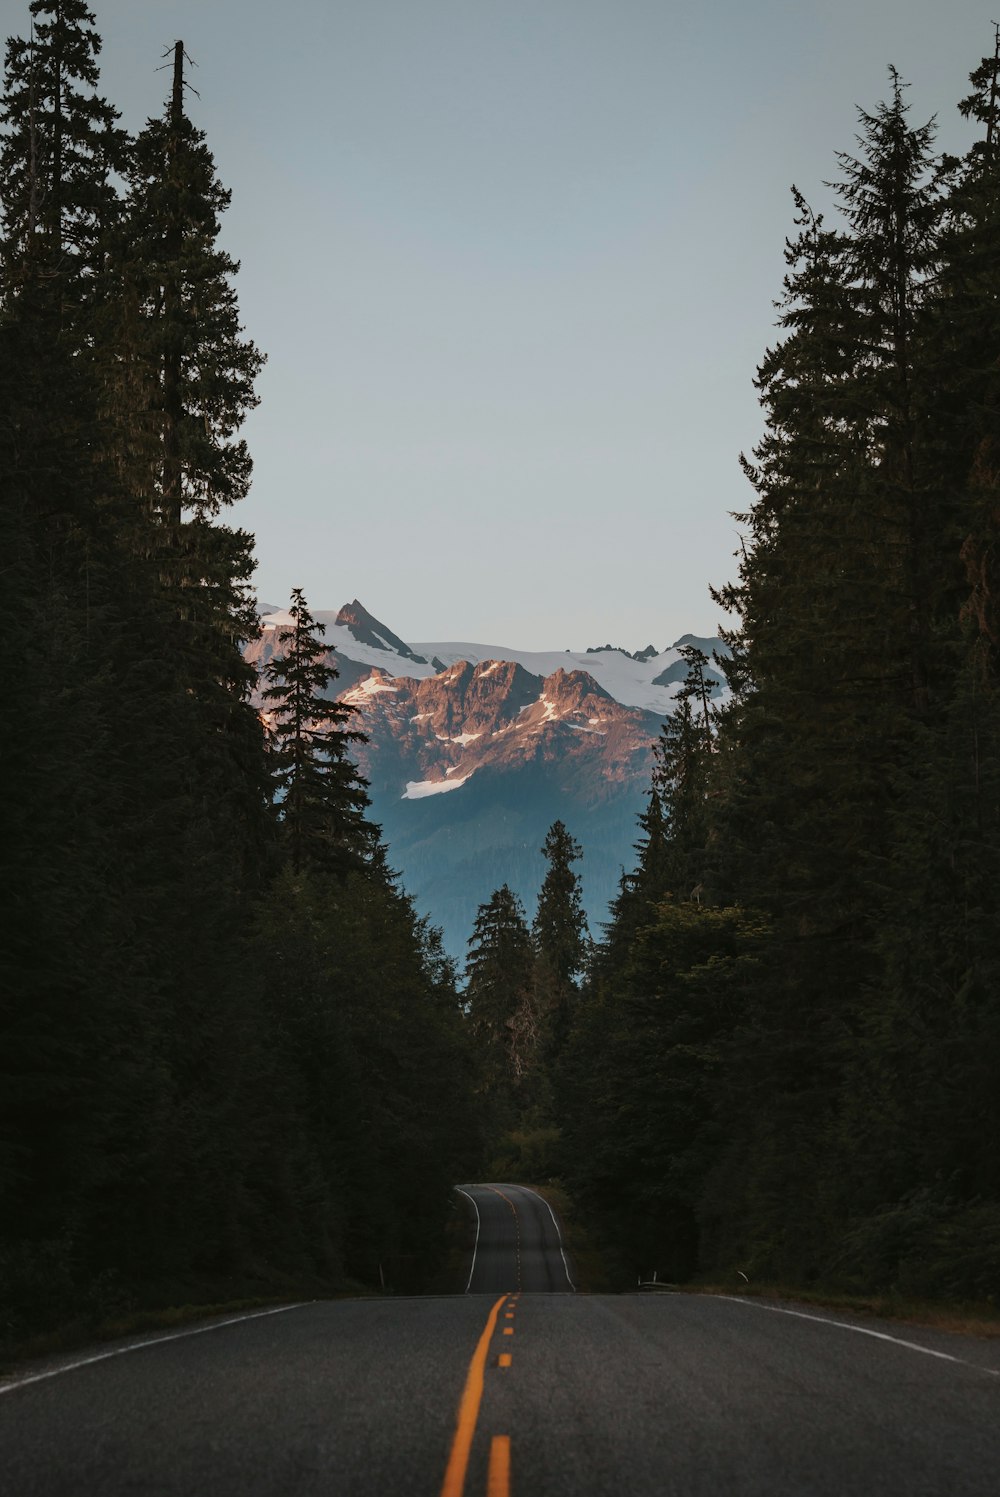 landscape photography of mountains, trees, and road